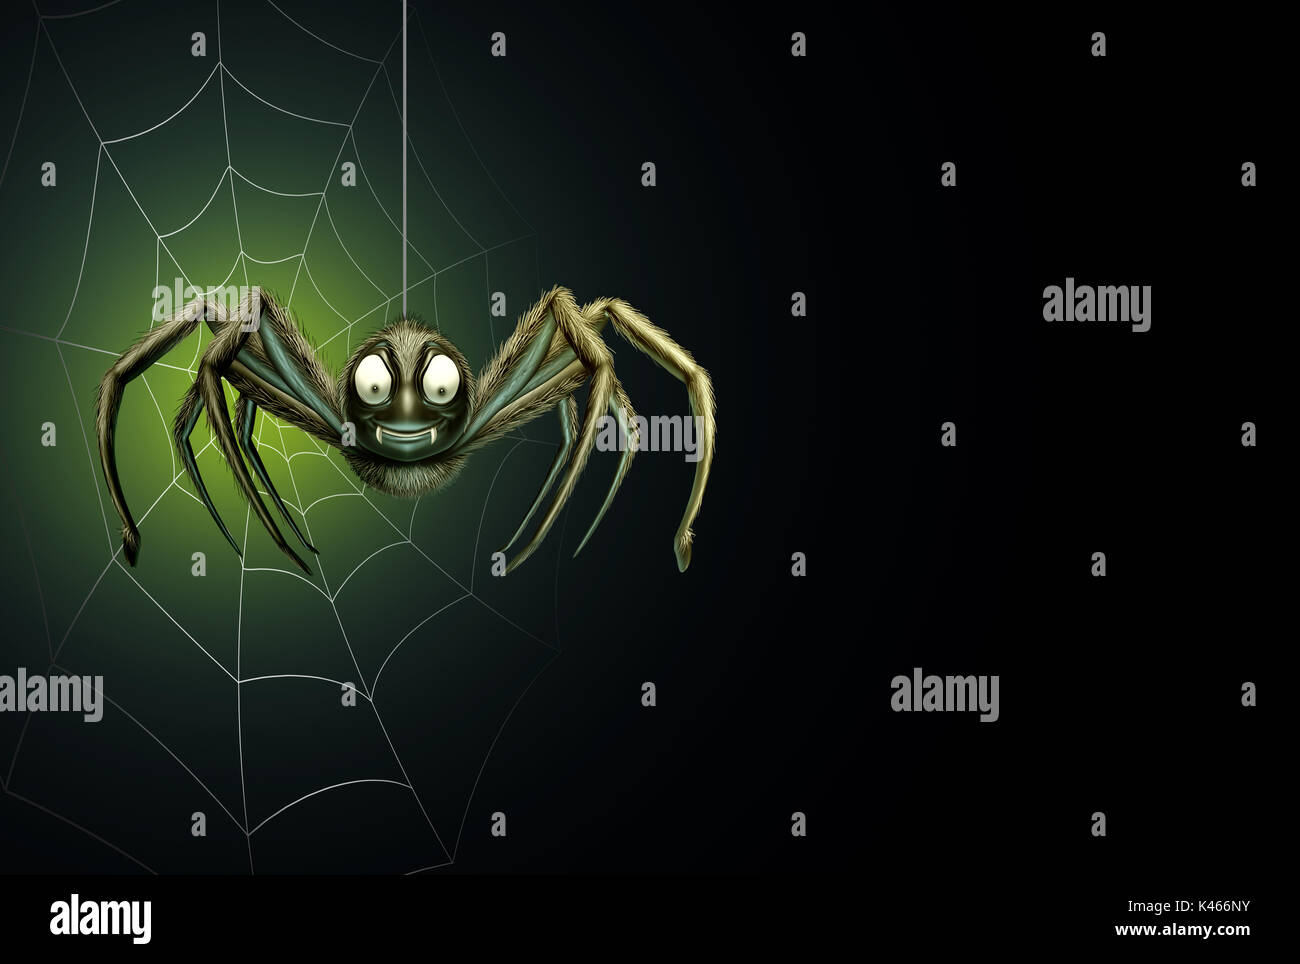 Spider halloween background as a creepy crawler arachnid insect hanging from a thread with a spiderweb on a glowing black blank area. Stock Photo